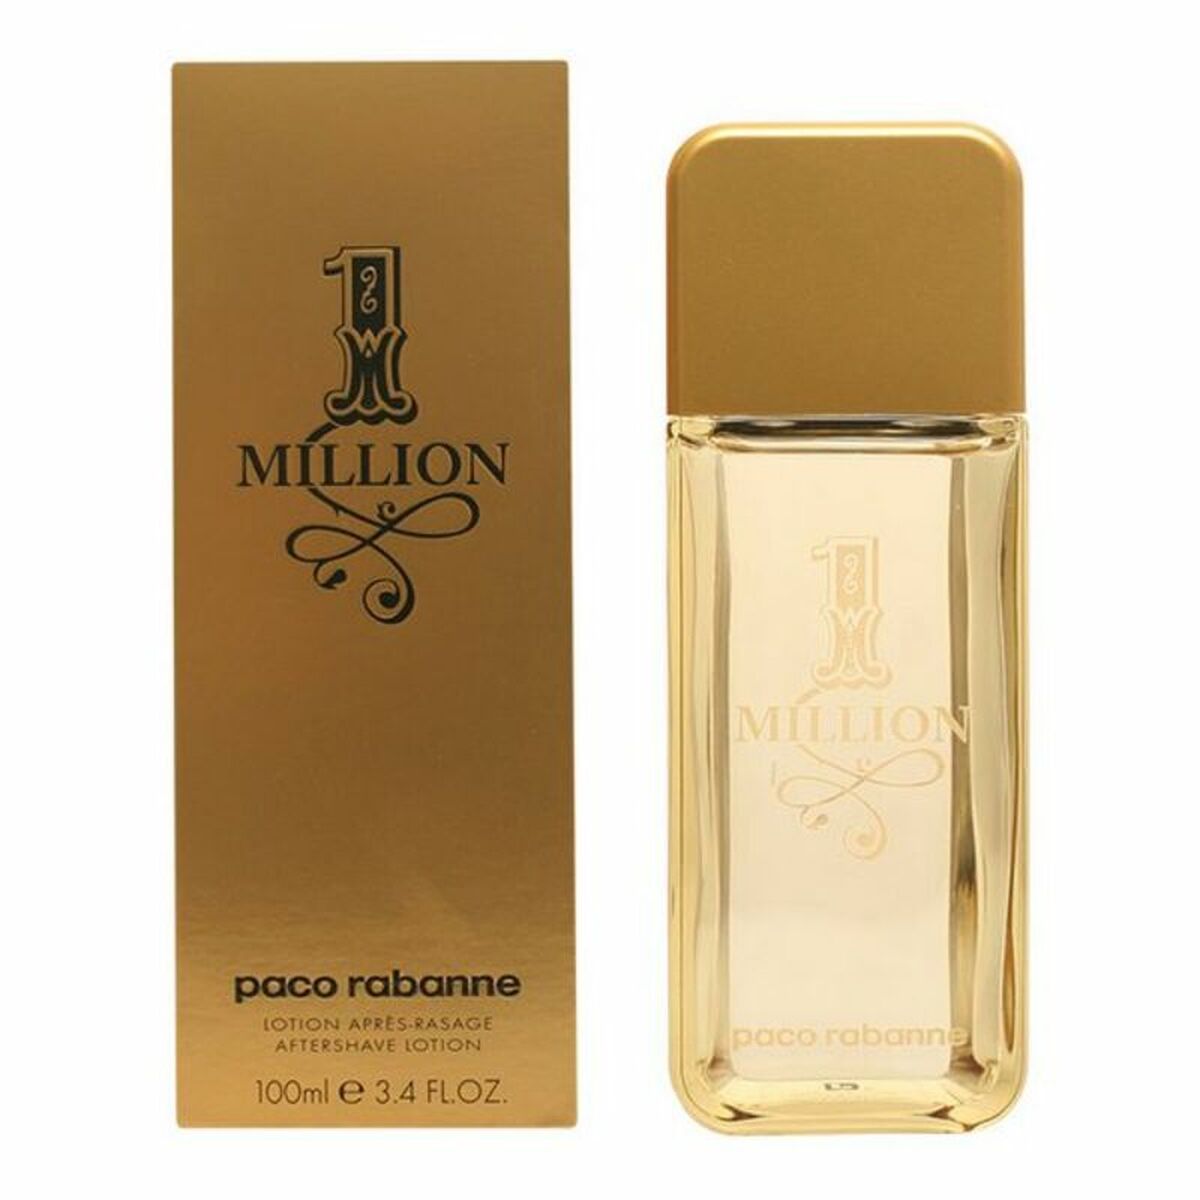 Kaufe Aftershave 1 Millon Paco Rabanne 100 ml bei AWK Flagship um € 69.00